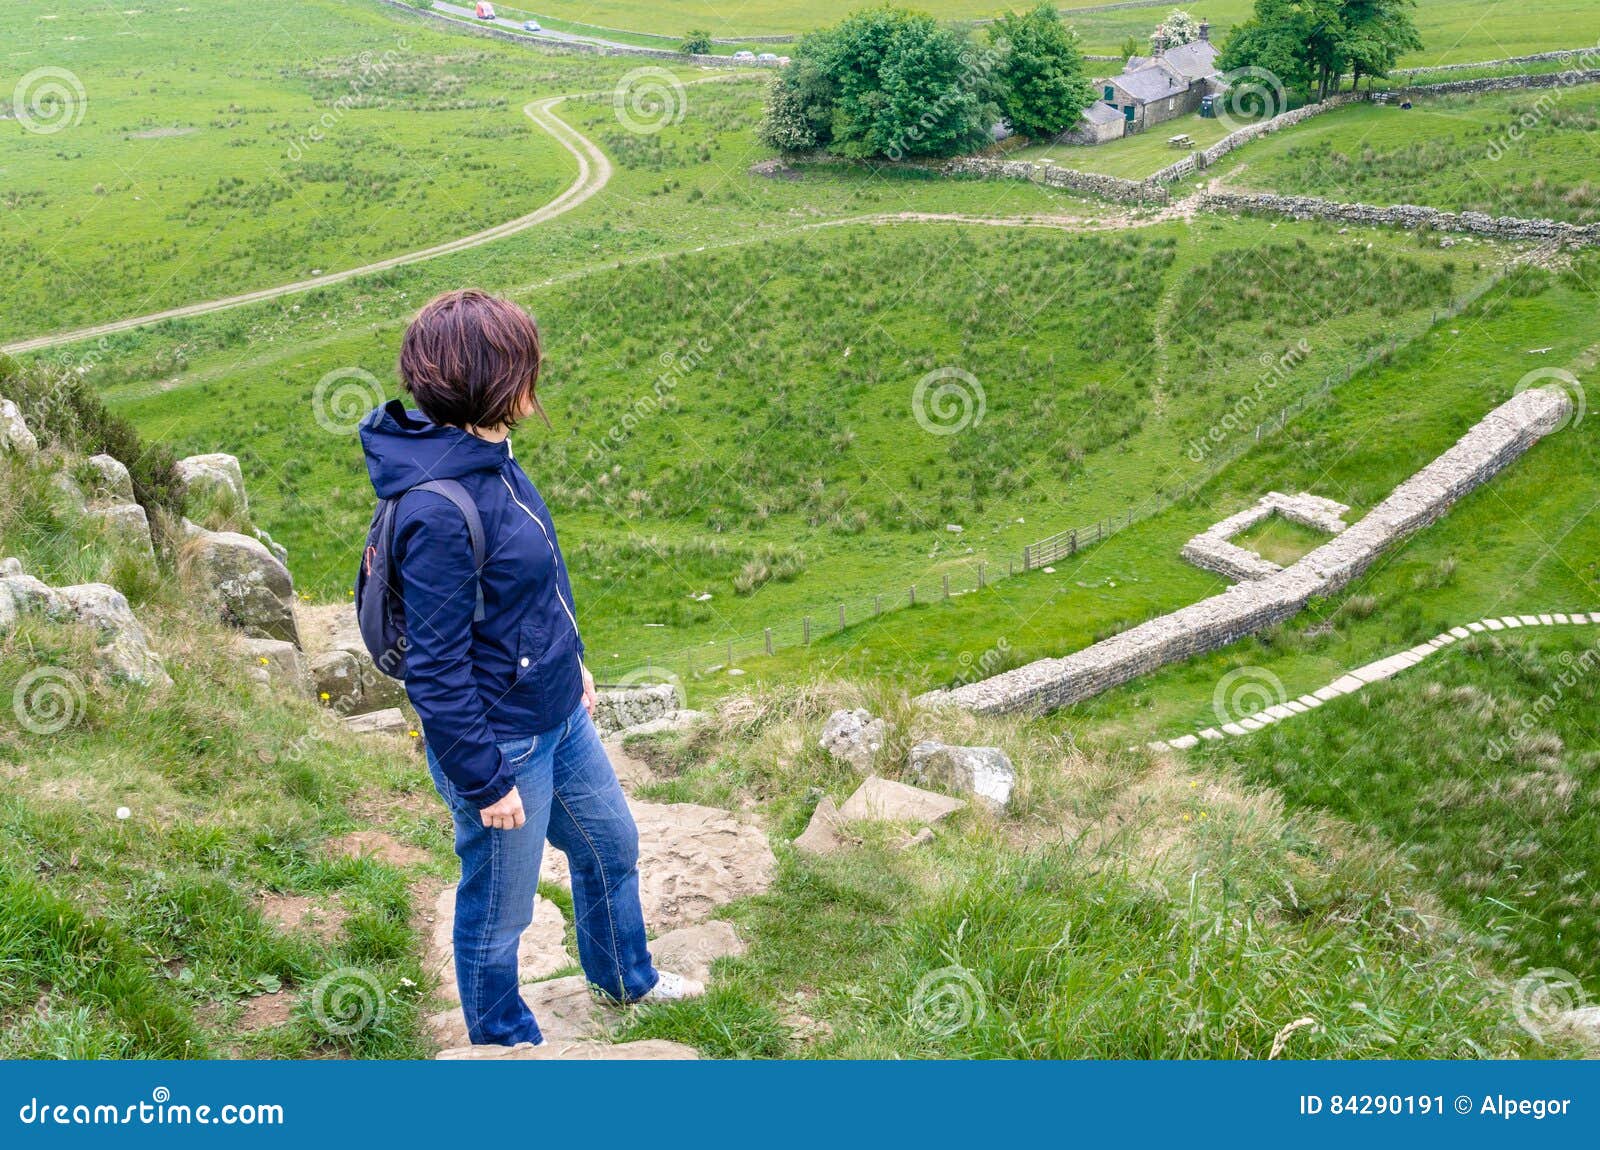 pilgrim path along steep steps to the … – License image – 70057520 ❘  lookphotos